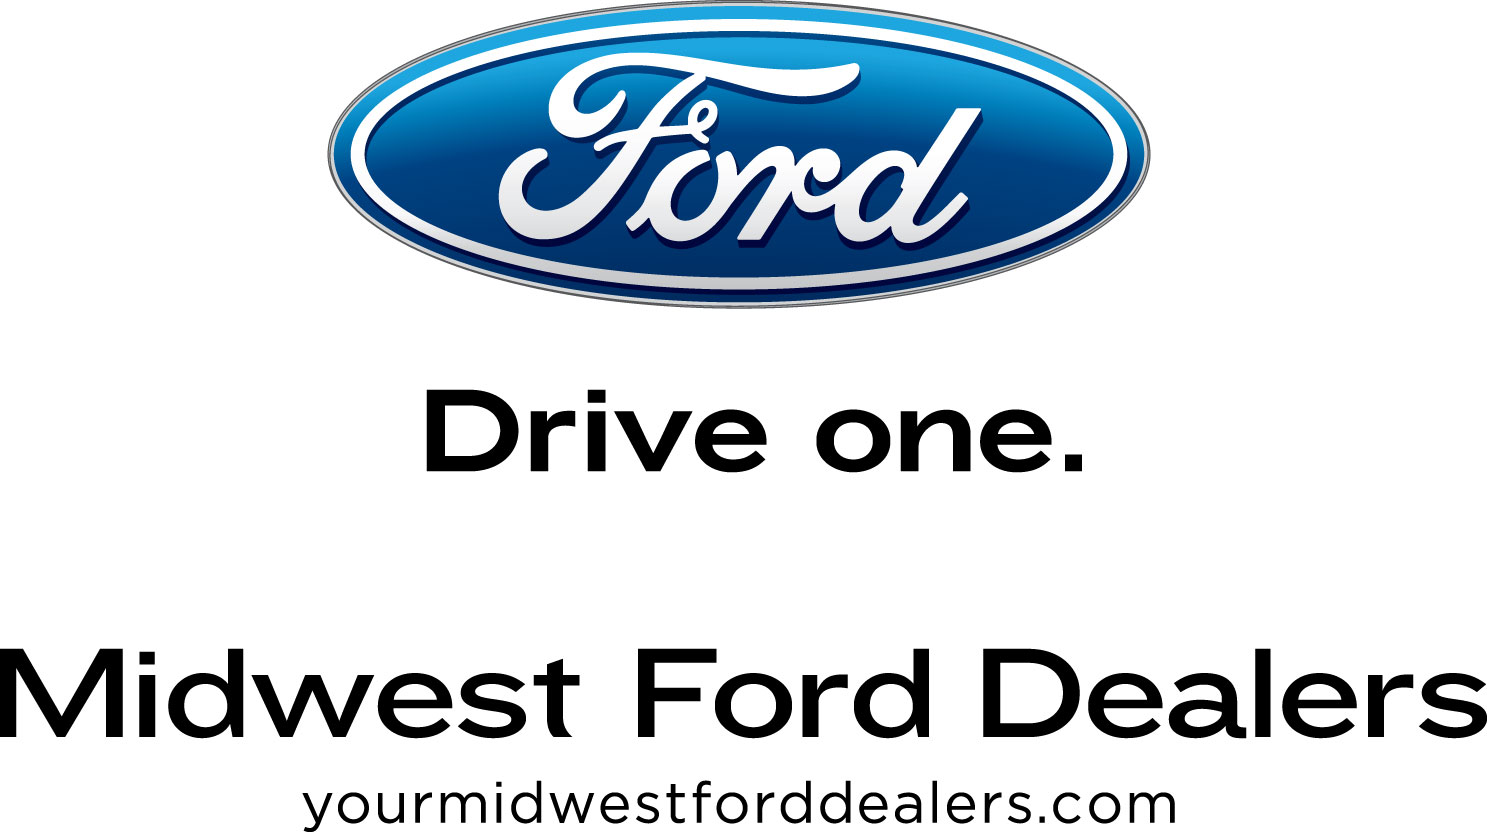 Midwest Ford Dealers Logo